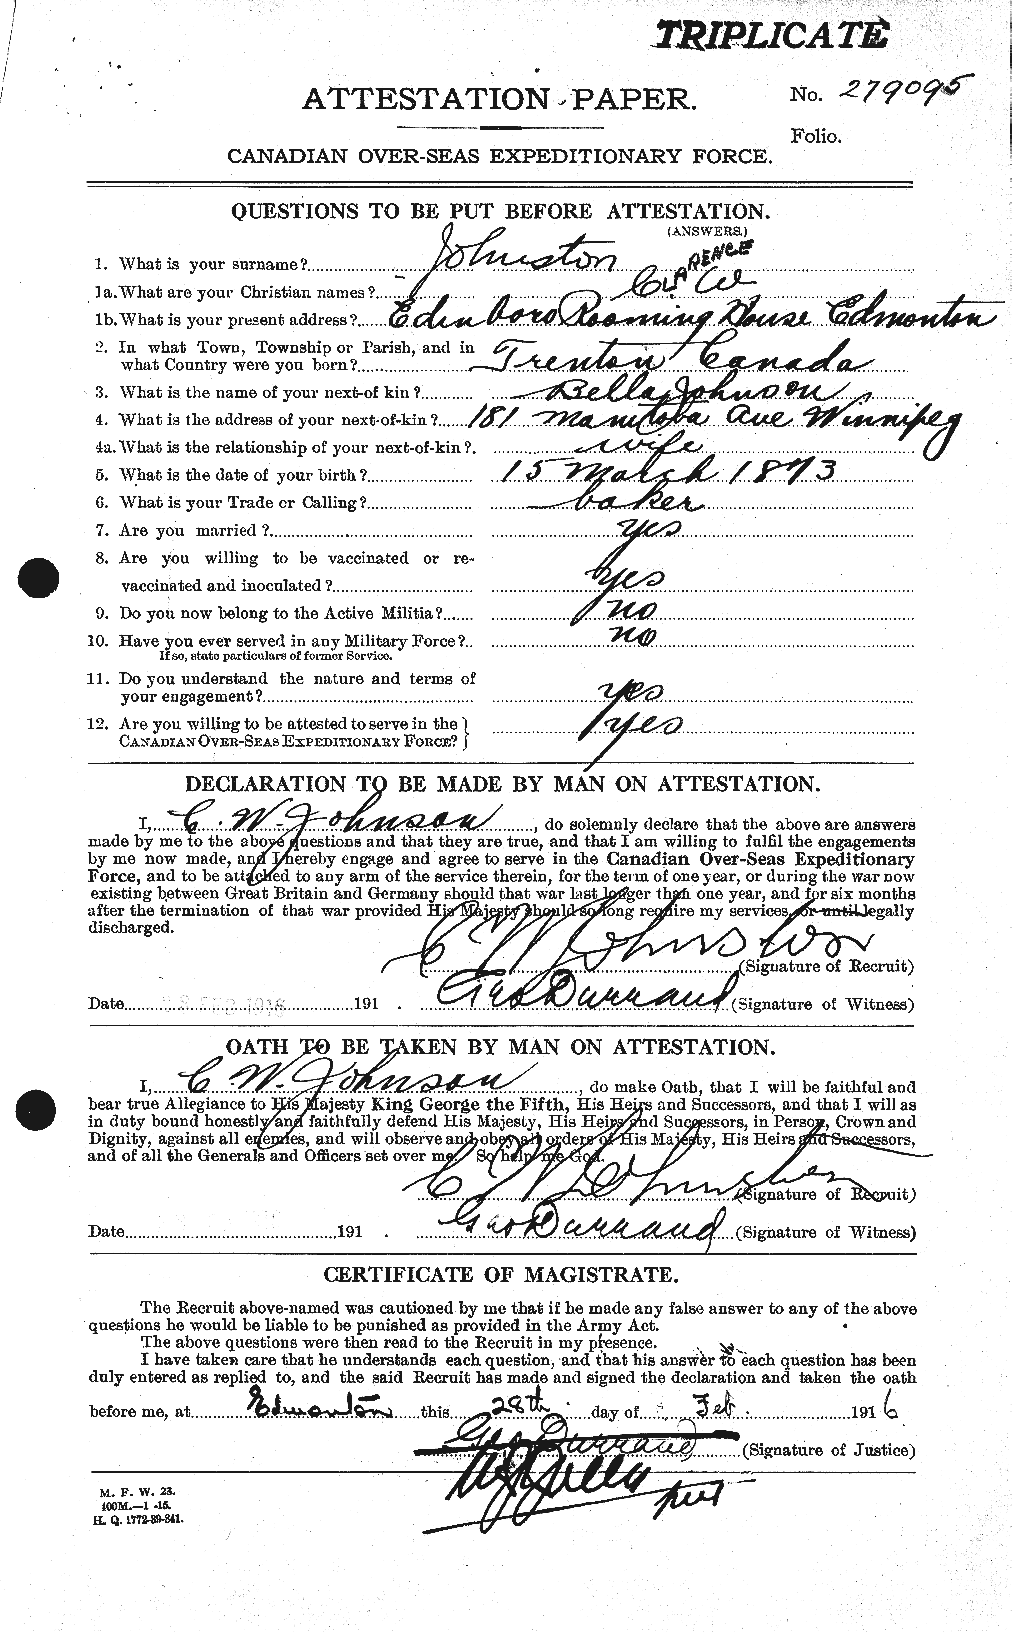 Personnel Records of the First World War - CEF 423133a